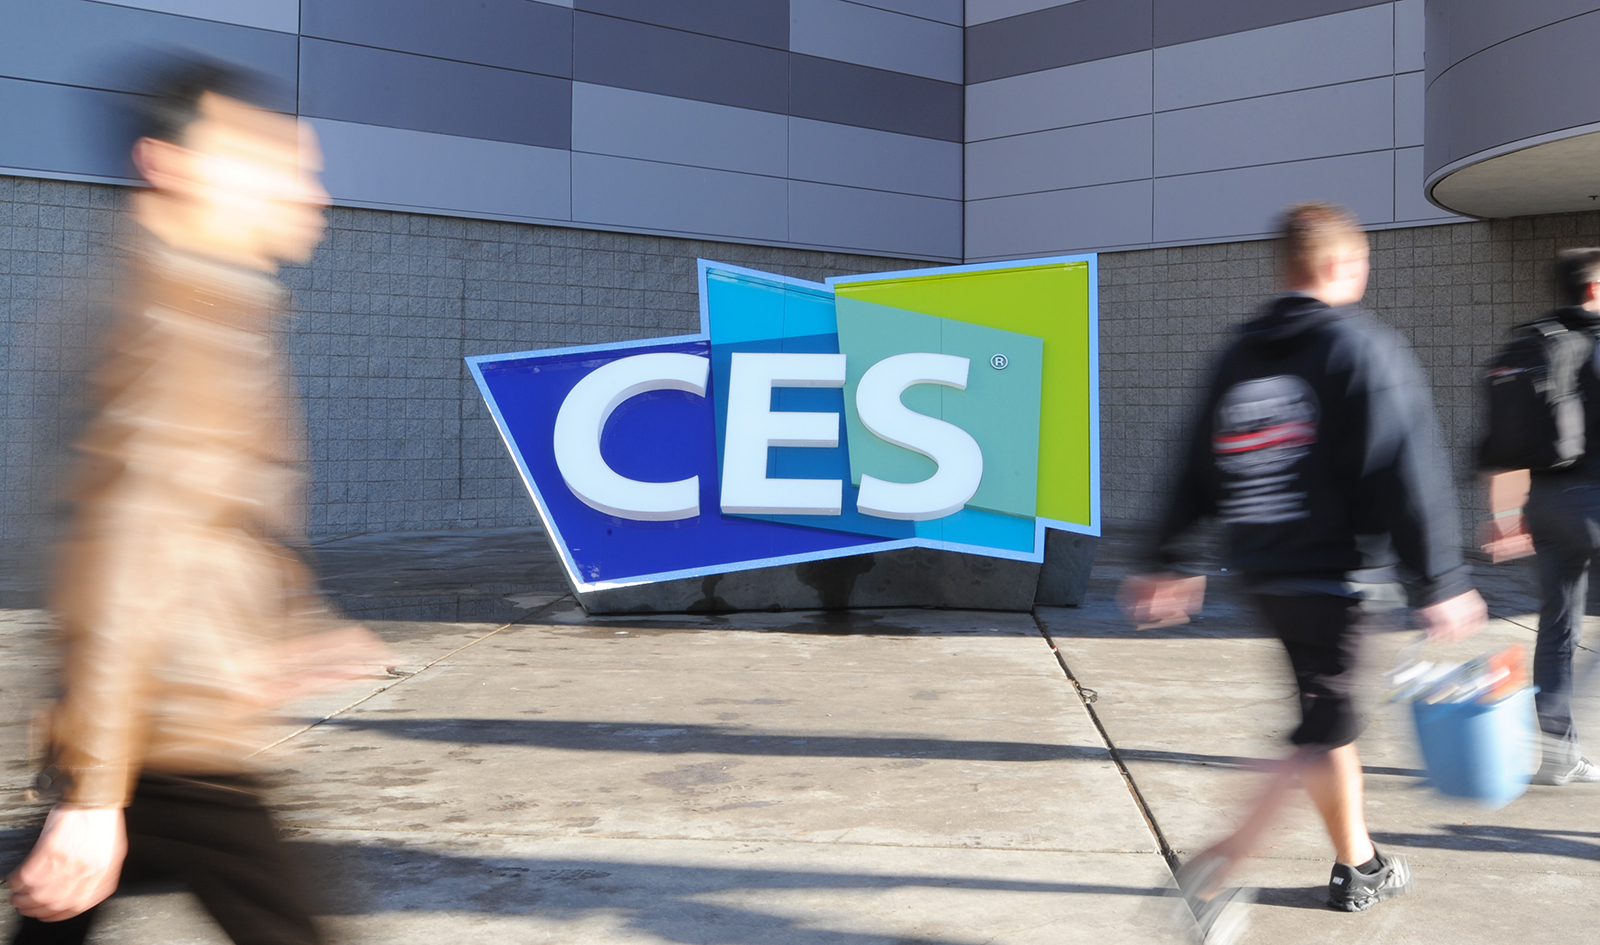 Meet the real people of CES